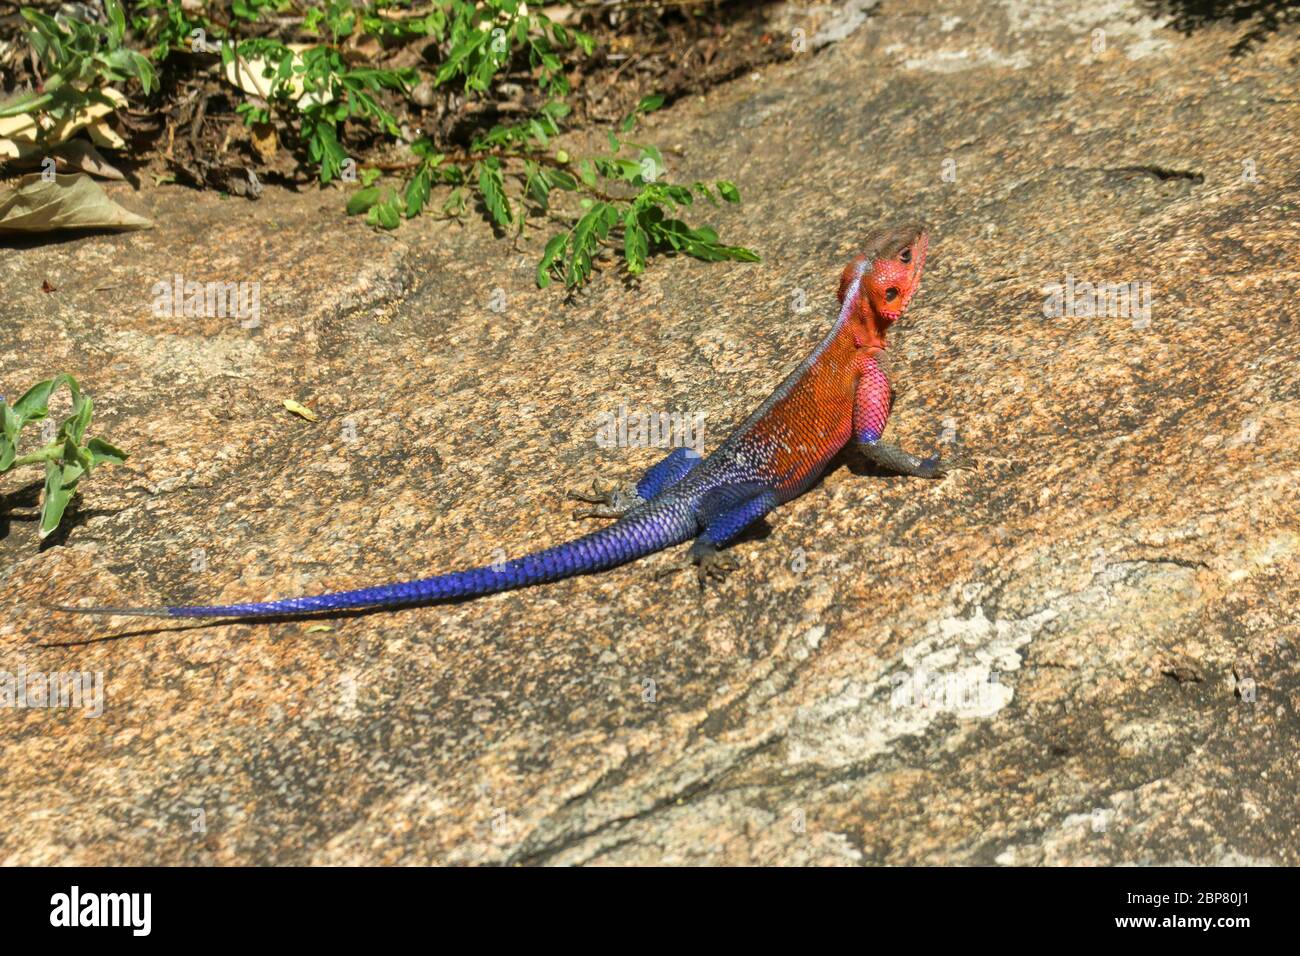 Male Mwanza flat-headed rock agama (Agama mwanzae) or the Spider-Man agama, because of its coloration, is a lizard reptile in the family Agamidae, fou Stock Photo